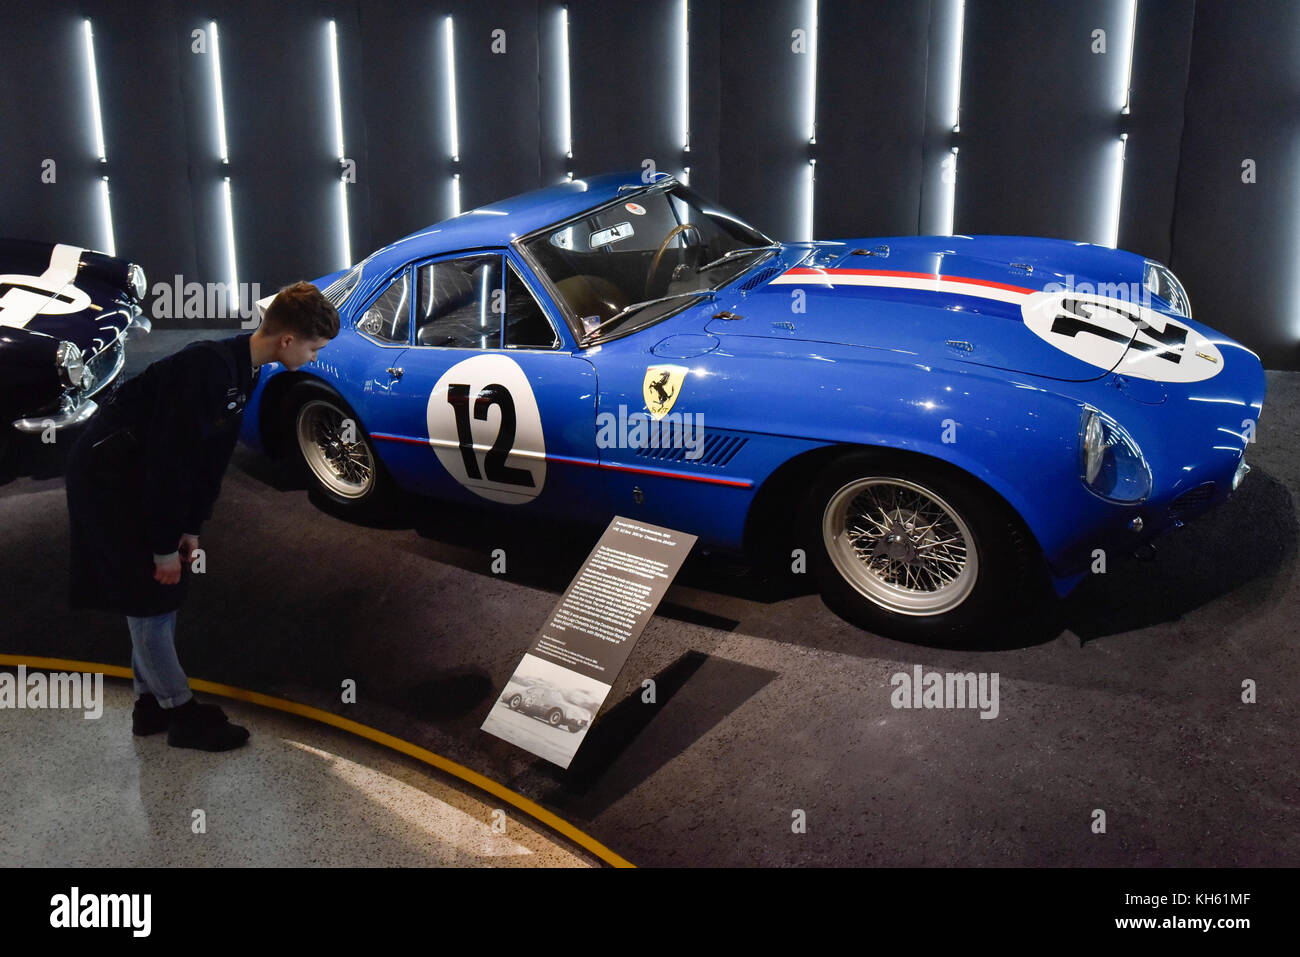 London, UK.  14 November 2017. A Ferrari 250 GT Sperimentale, 1961. Preview of 'Ferrari: Under the Skin', an exhibition at the Design Museum to mark the 70th anniversary of Ferrari.  Over GBP140m worth of Ferraris are on display from private collections including Michael Schumacher's 2000 F1 winning car.  The show runs 15 November to 15 April 2018.  Credit: Stephen Chung / Alamy Live News Stock Photo